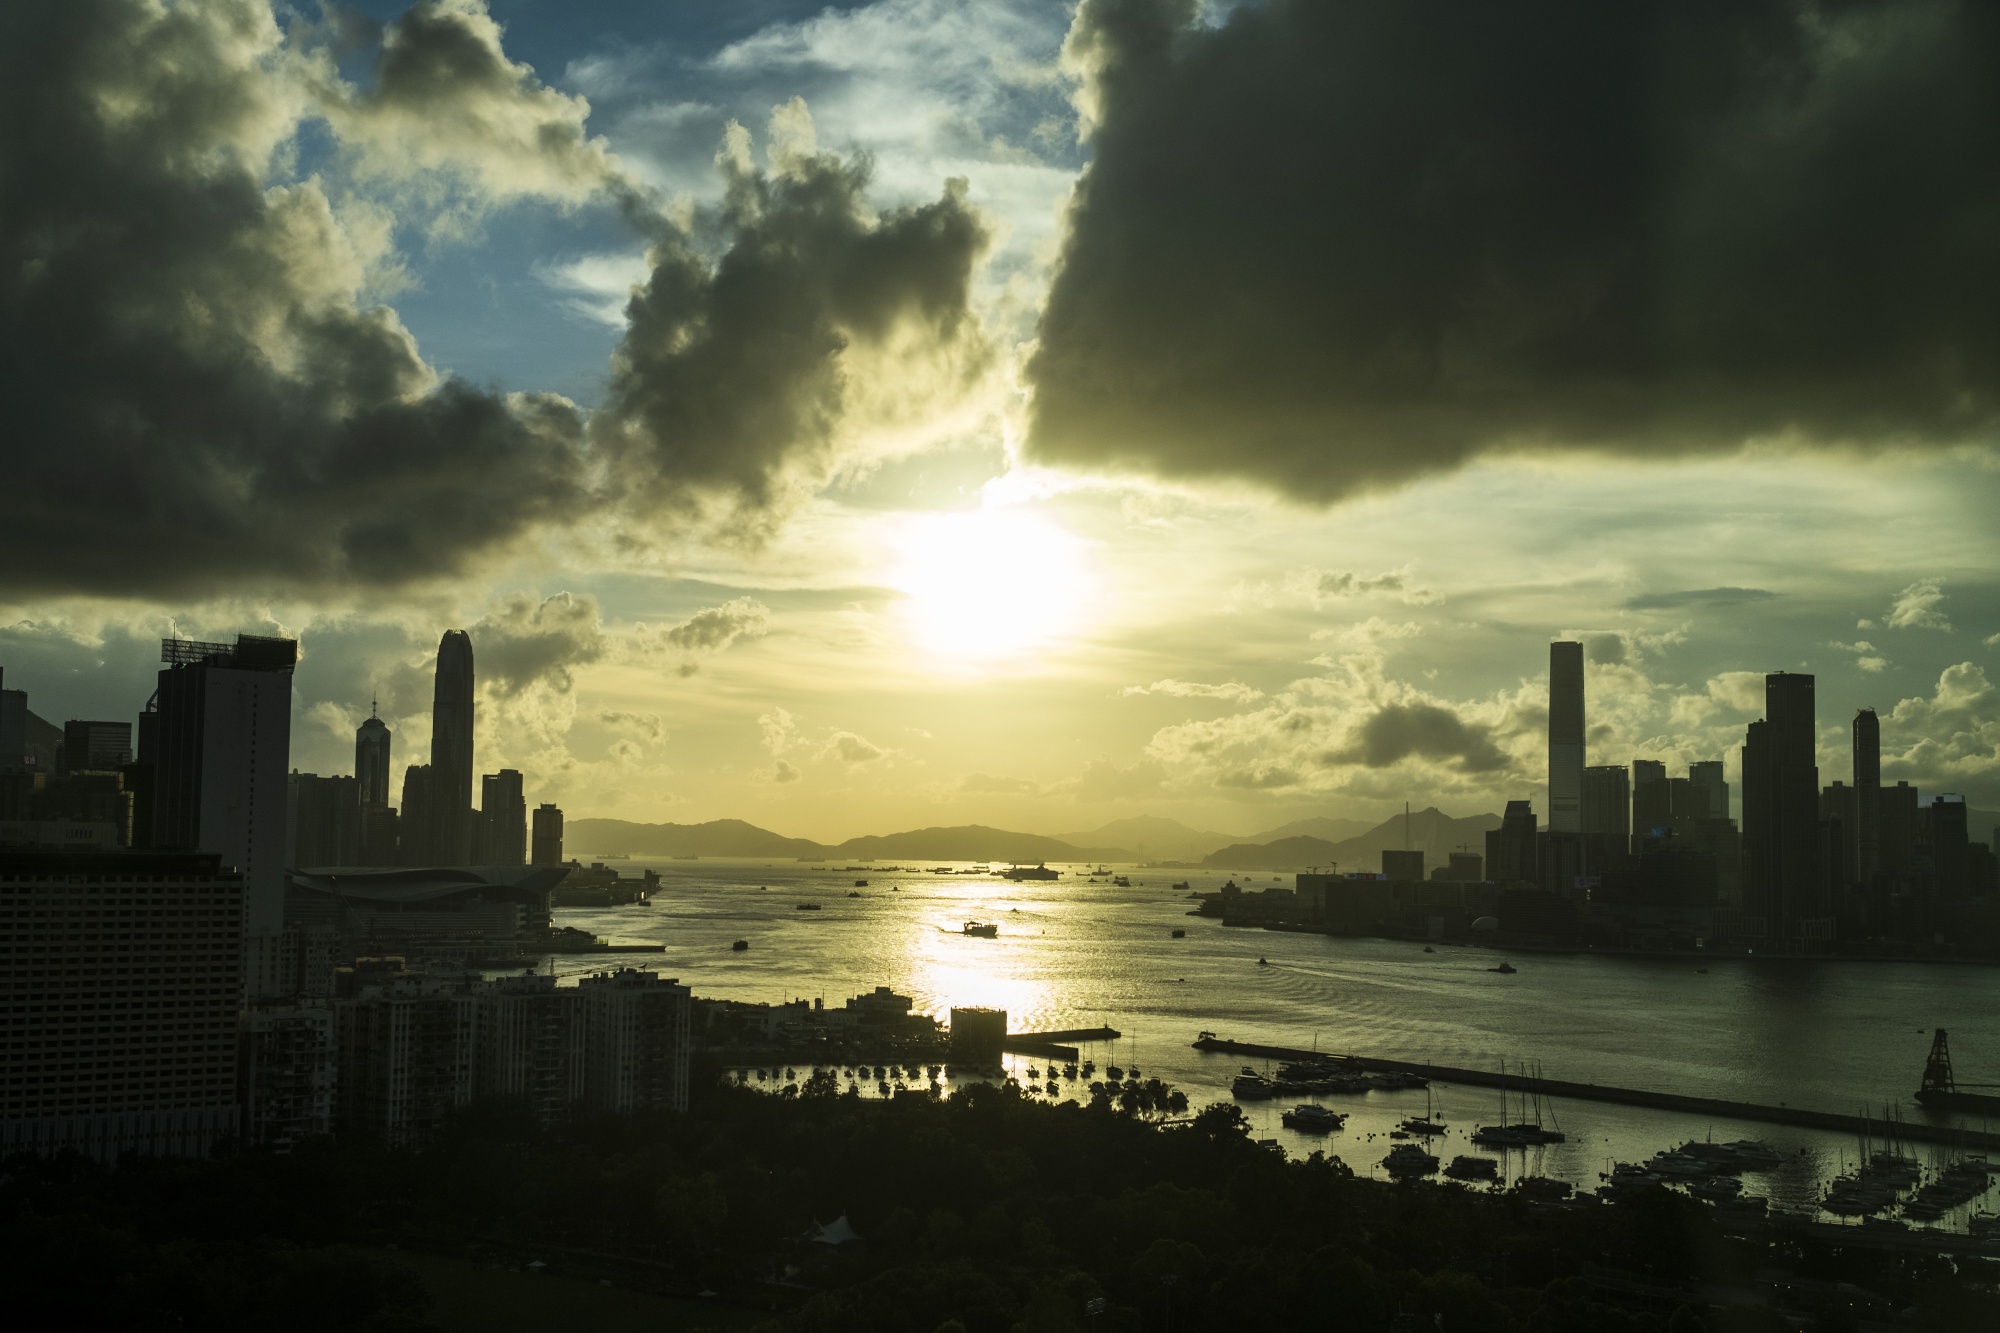 Hong Kong Taps Tycoons to Help Attract Family Offices - Bloomberg